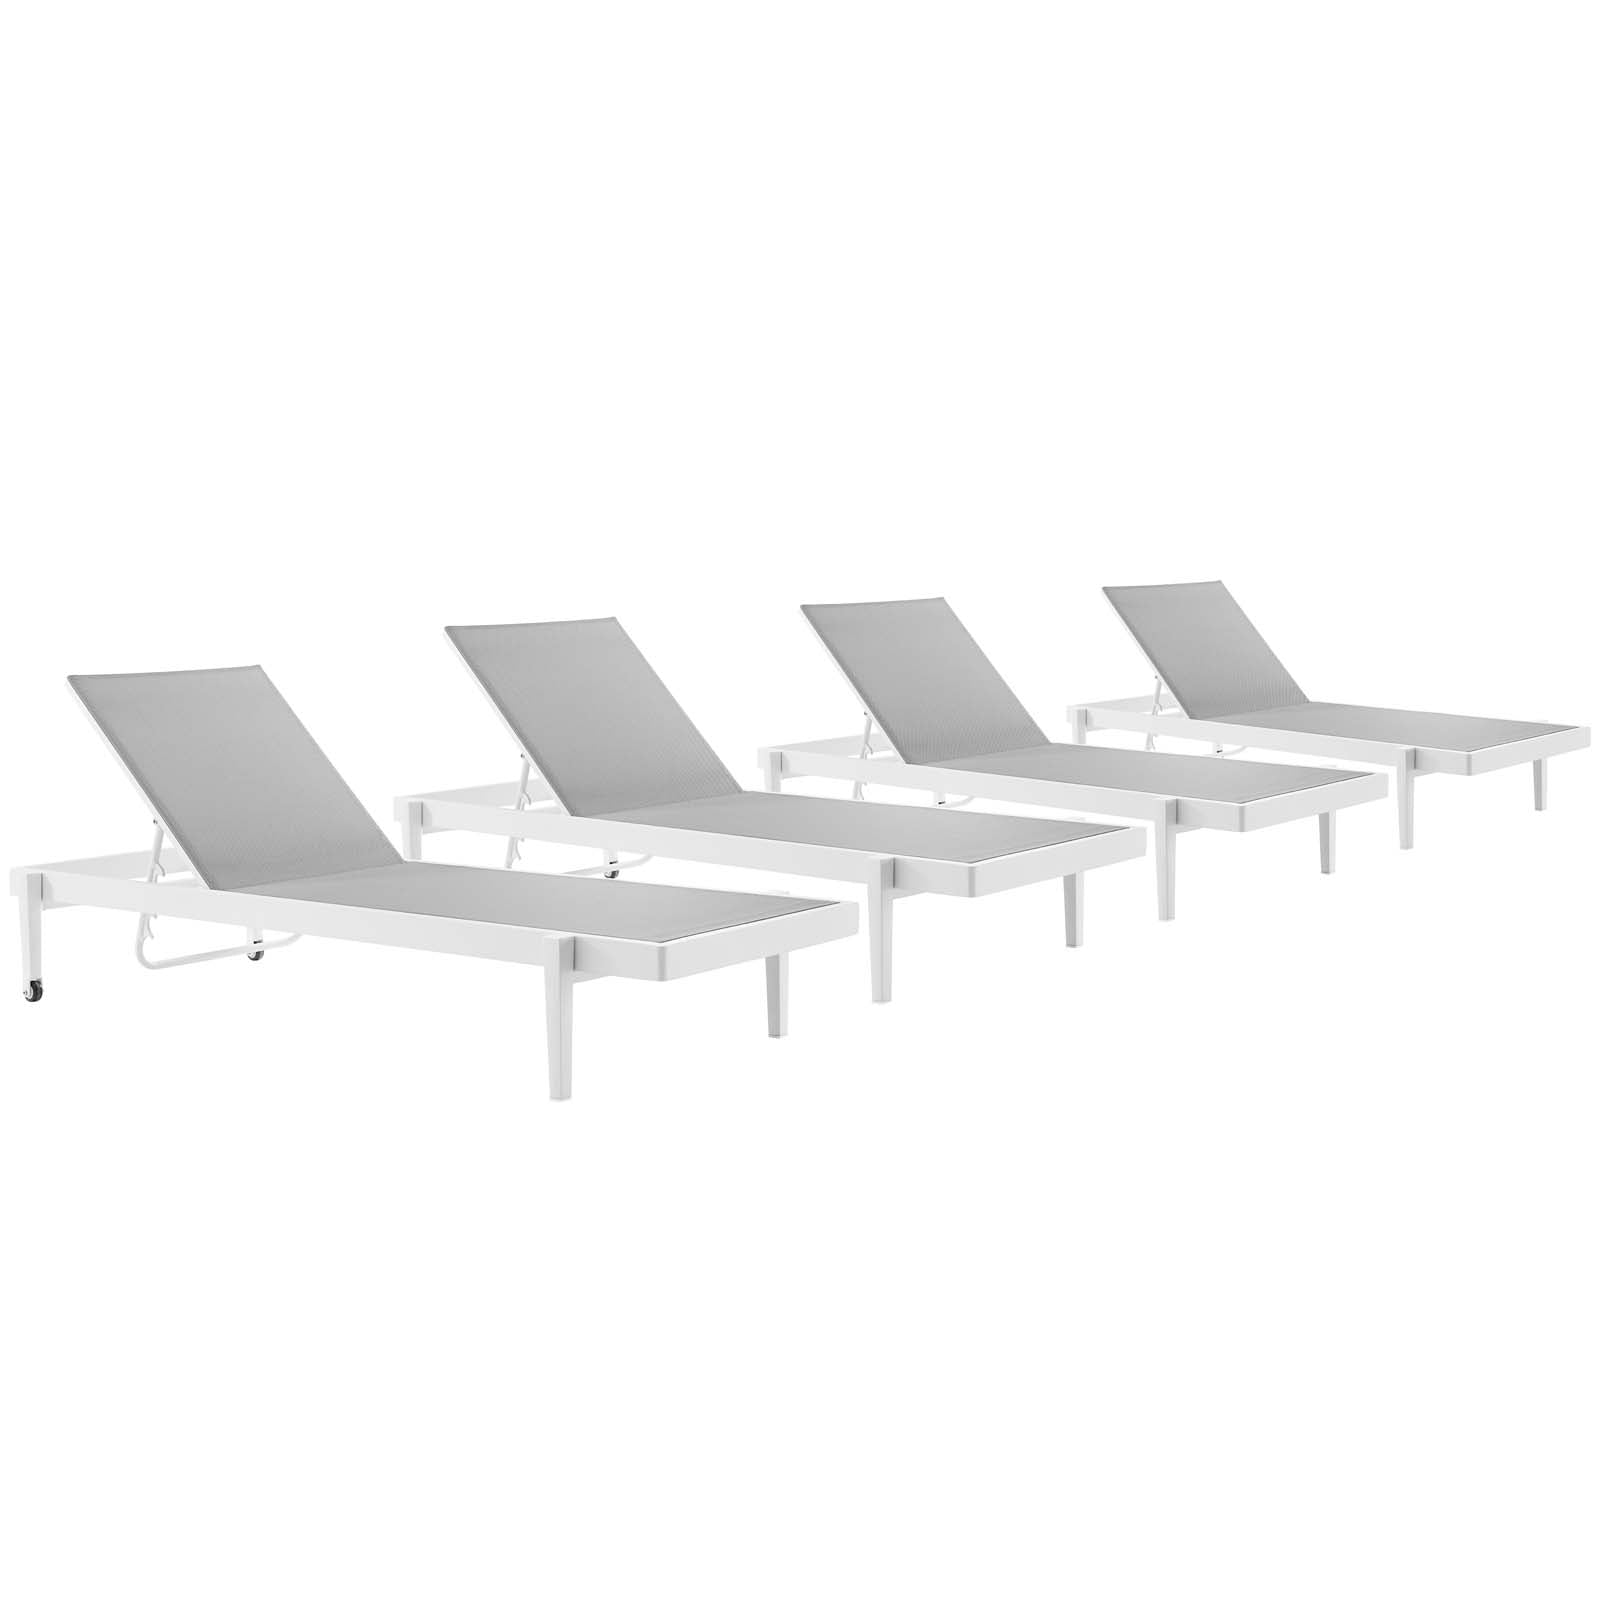 Charleston Outdoor Patio Aluminum Chaise Lounge Chair Set of 4